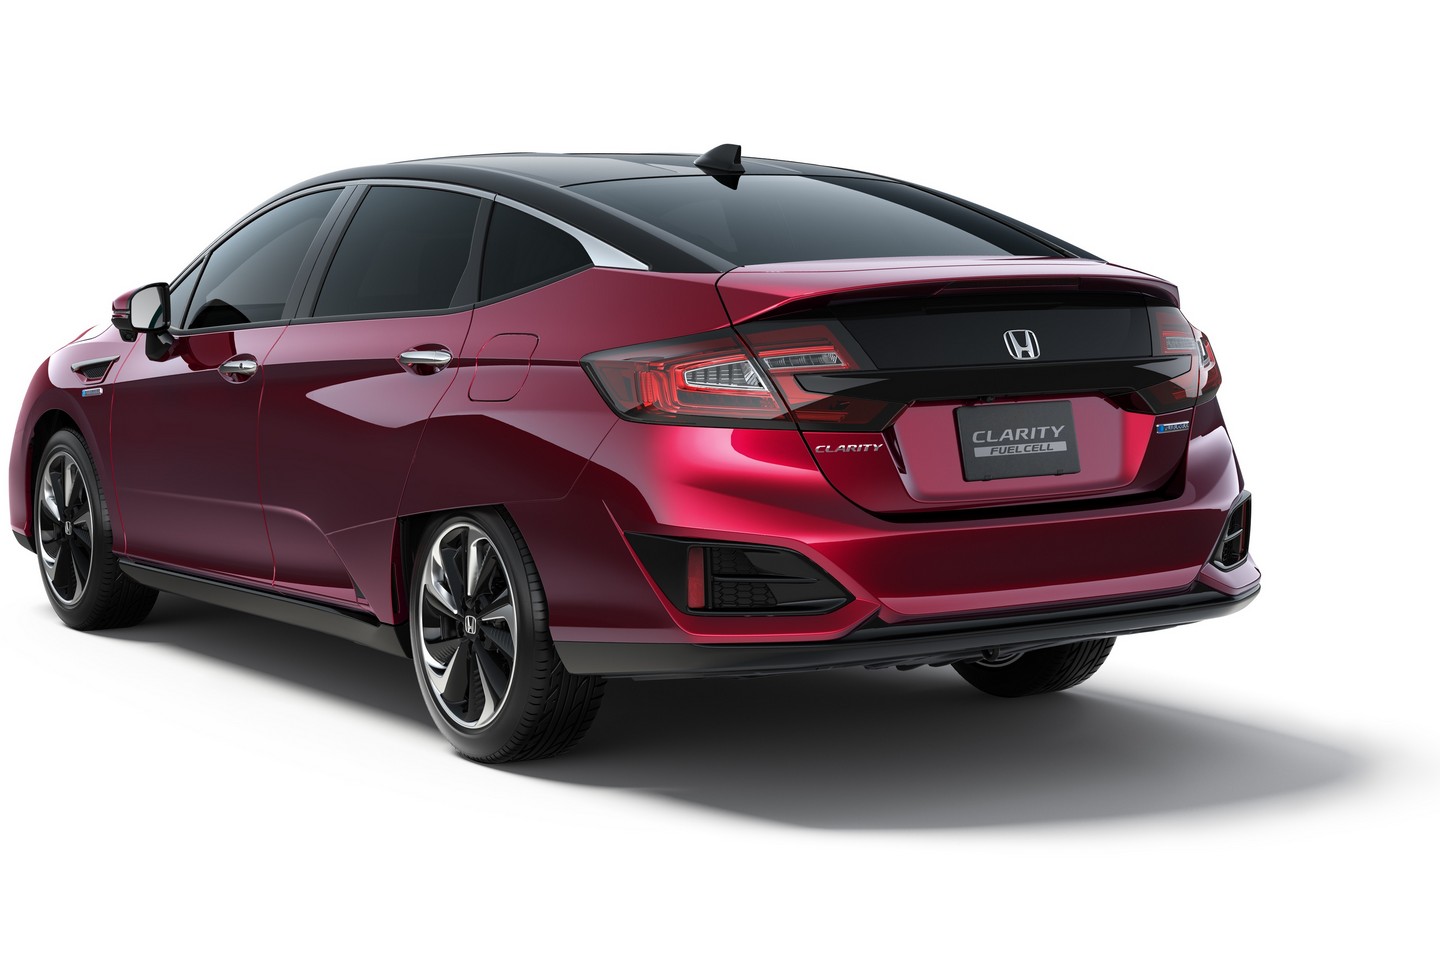 Honda Clarity Fcv Goes On Sale In Japan Europe And U S To Follow This Year Carscoops